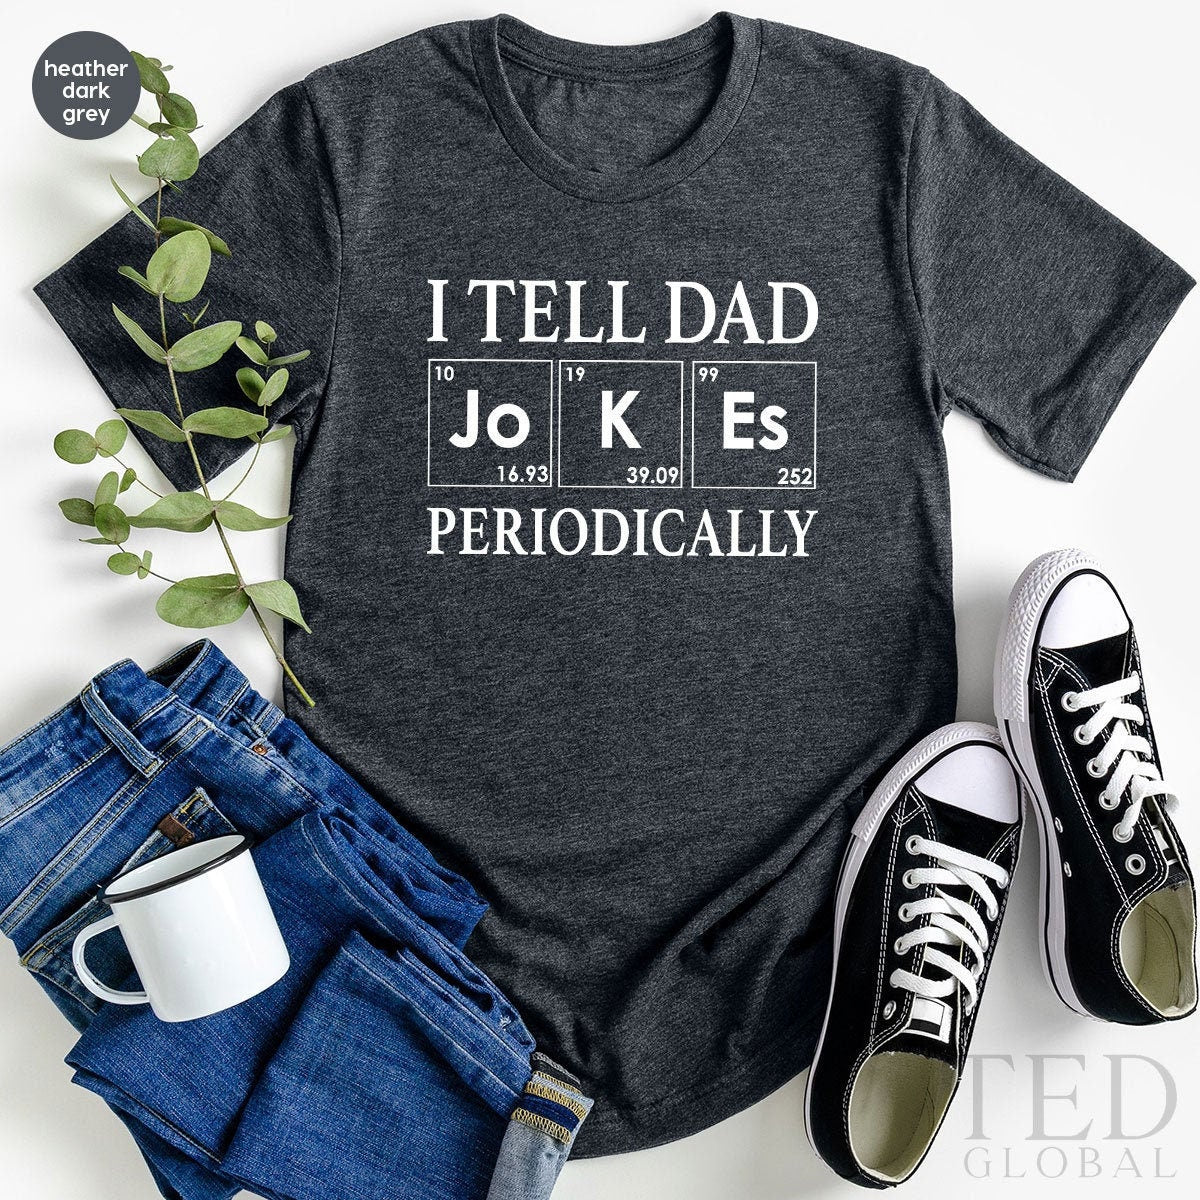 Fathers Day Tee, Funny Dad Shirt, I Tell Jokes Periodically Shirt, Gift For Husband, Dad Joke Shirt, Gifts For Dad,  Daddy T Shirt - Fastdeliverytees.com